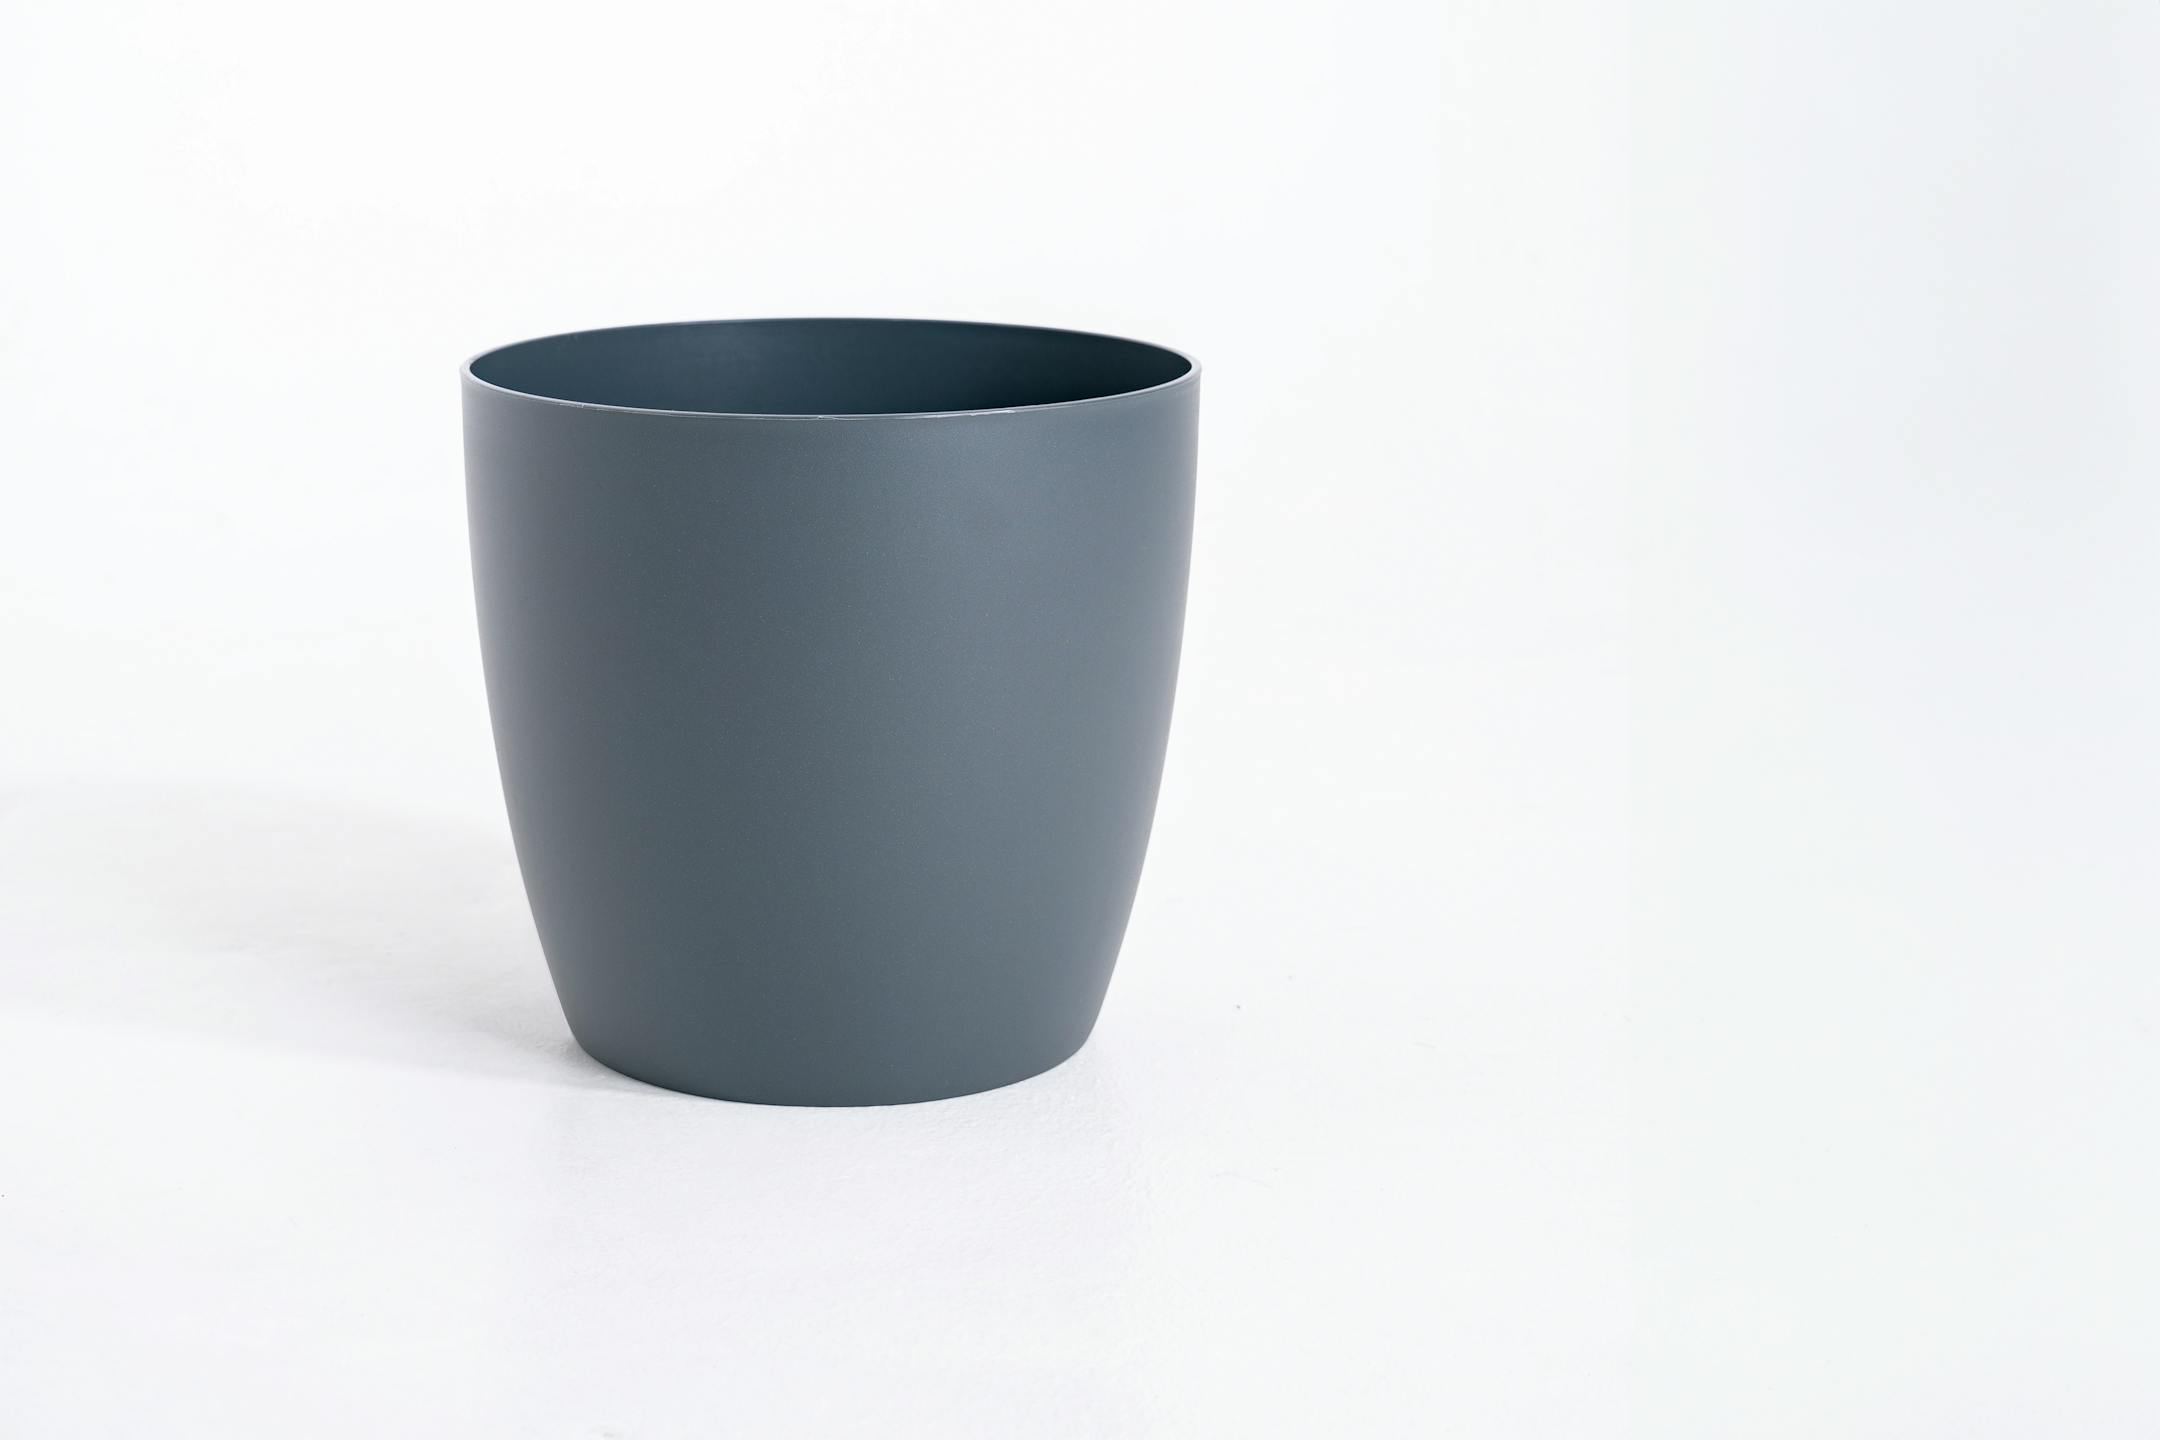 Anthracite Brussels round plant pot